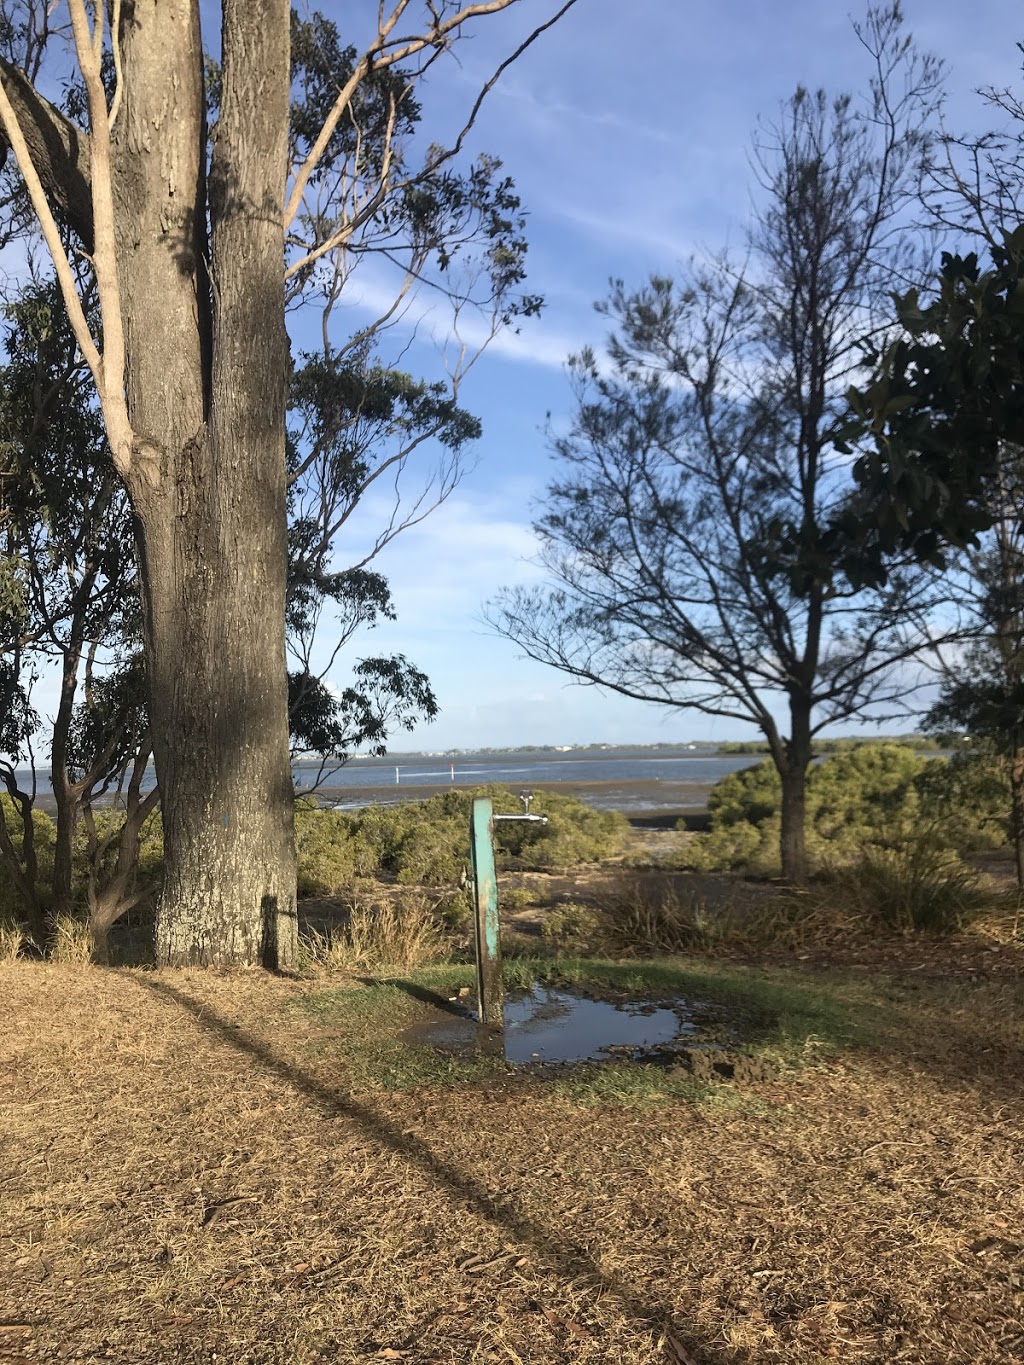 Best Water Tap On The Waterfront | Lota QLD 4179, Australia